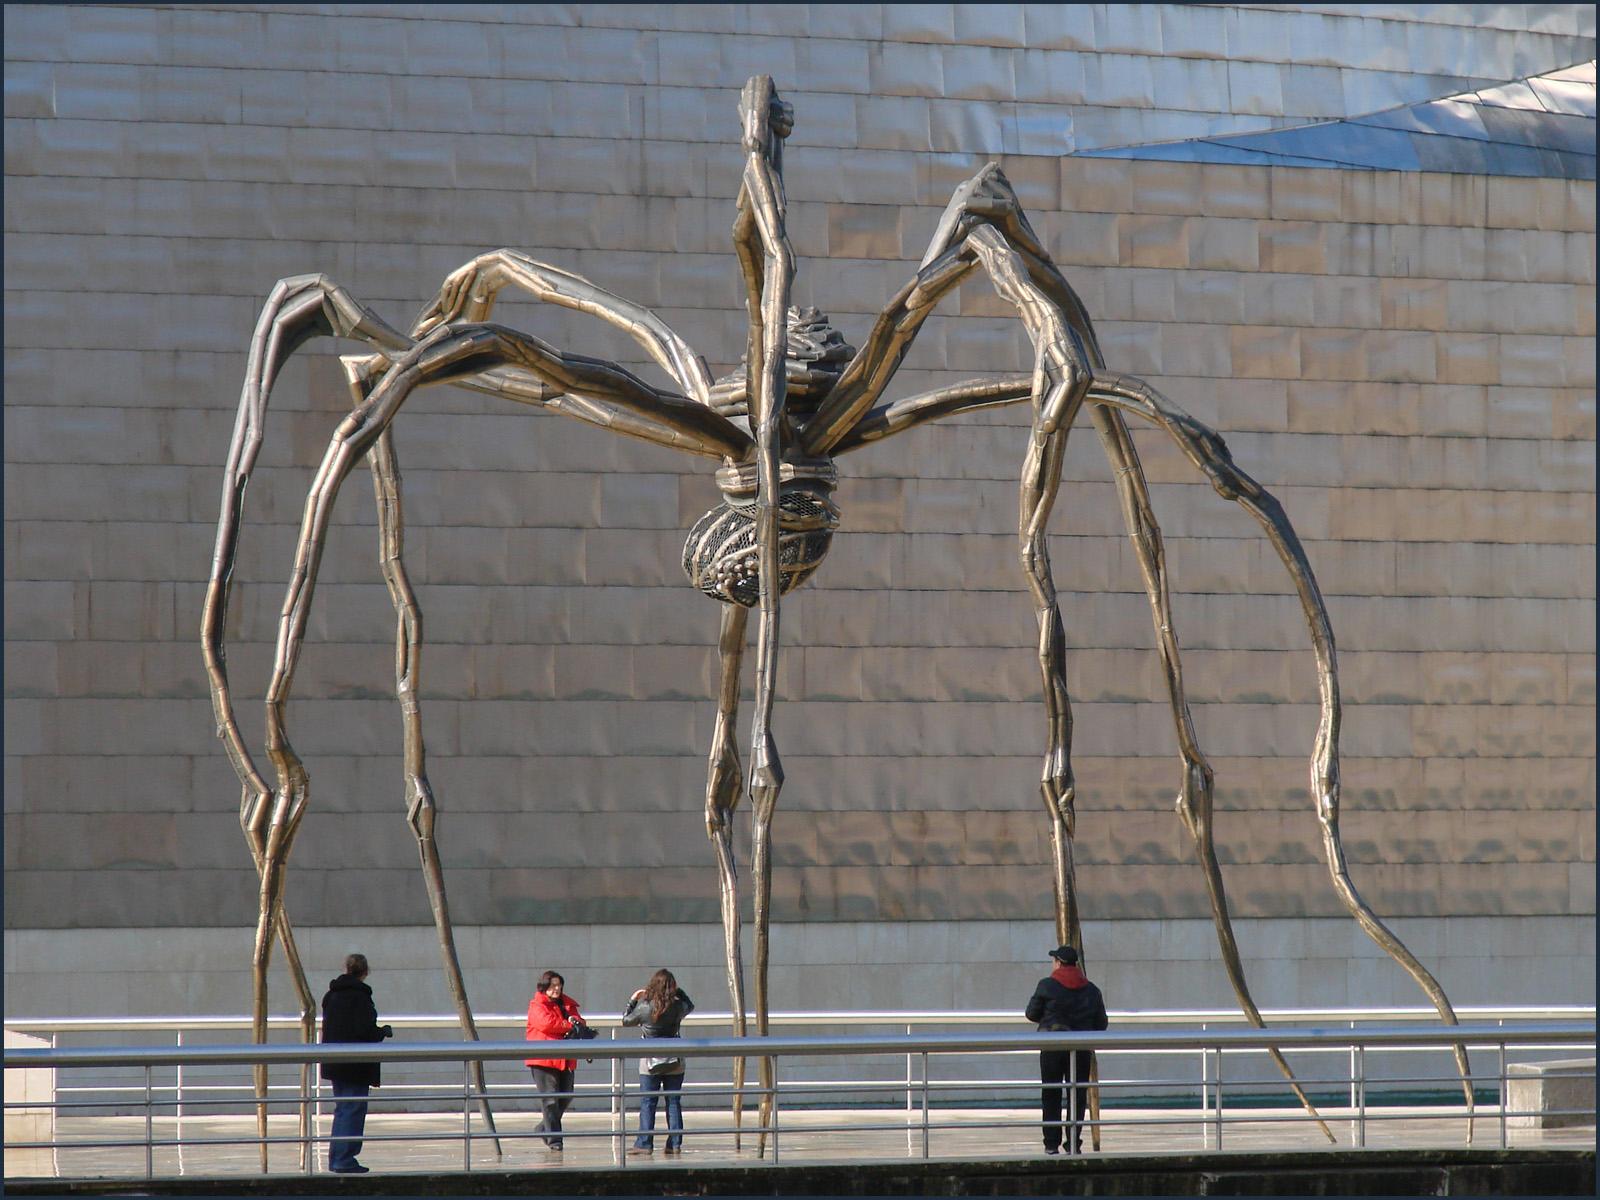 Louise Bourgeois, Maman,1999, cast 2001. Bronze, marble, and stainless steel. 29 feet 4 3/8 in x 32 feet 1 7/8 in x 38 feet 5/8 in (895 x 980 x 1160 cm).